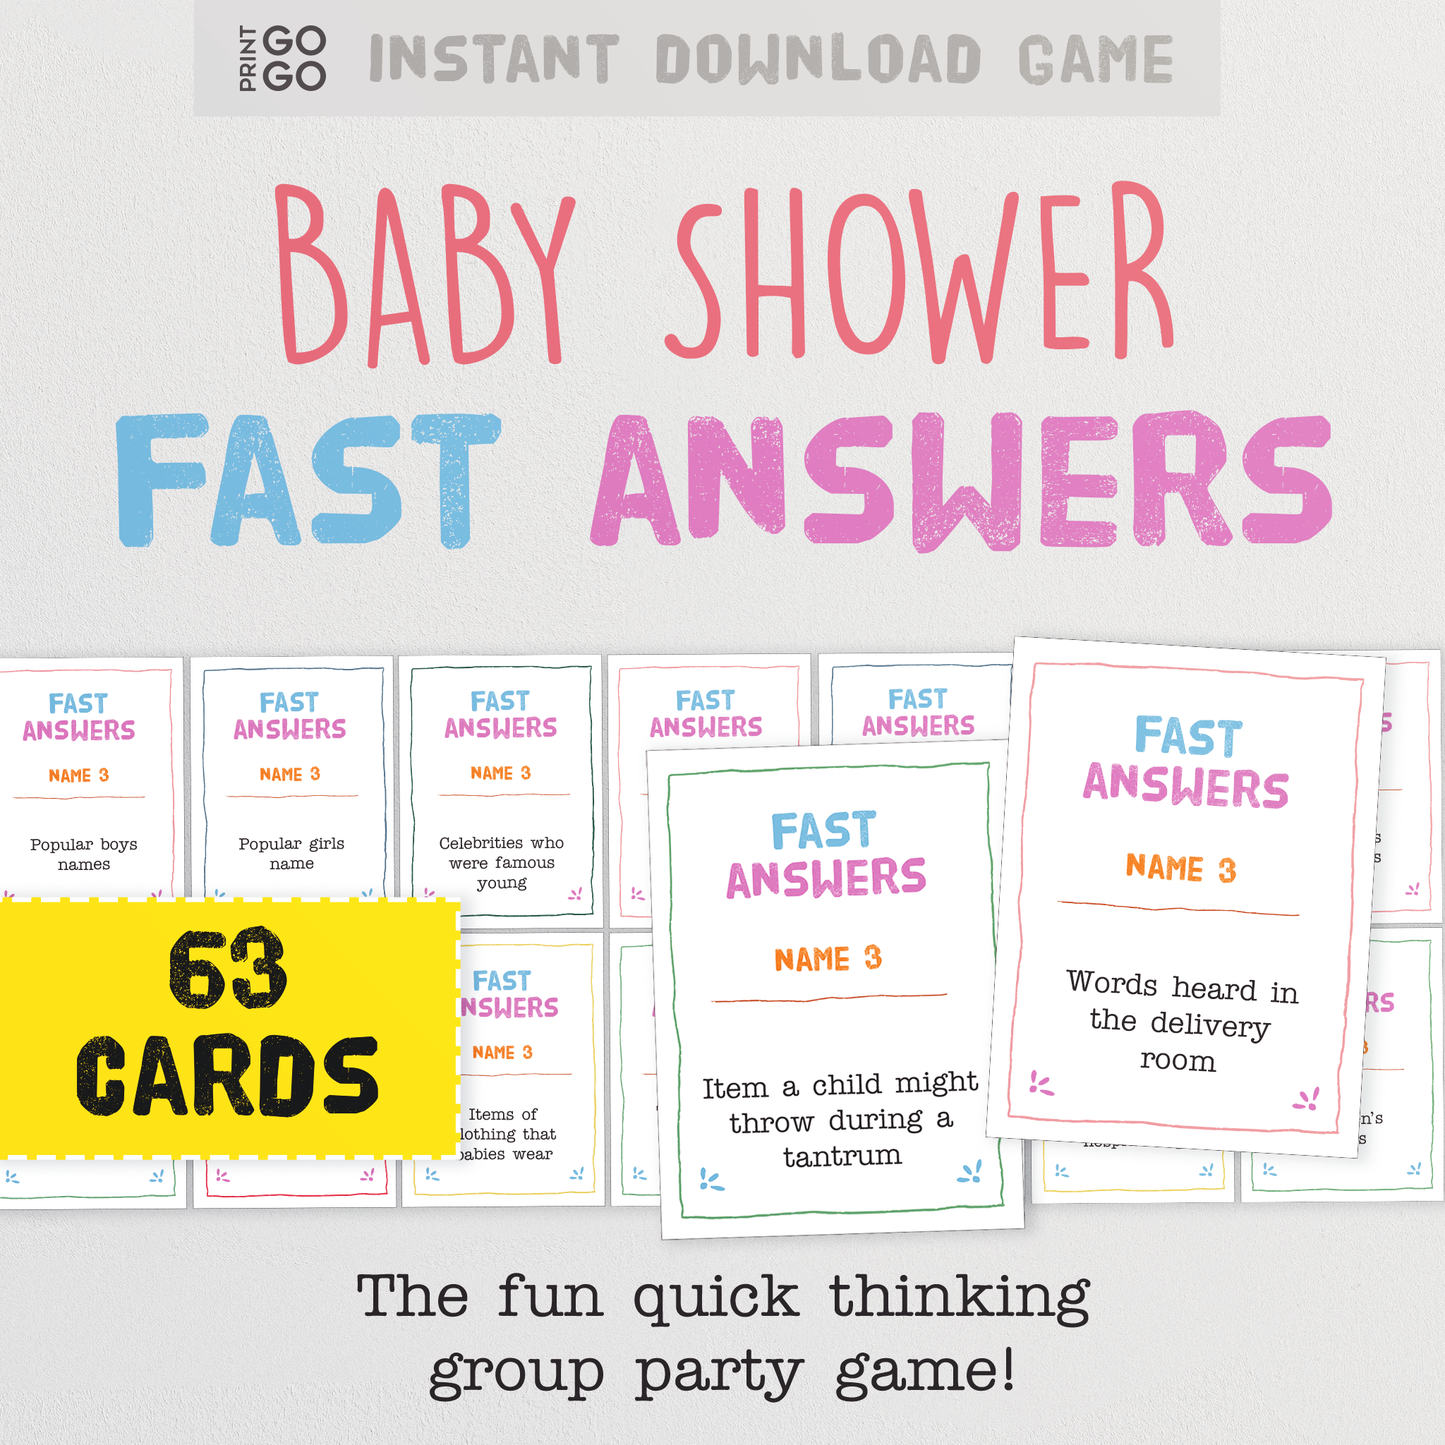 Baby Shower Fast Answers Game - The Fun Quick Thinking Group Party Game